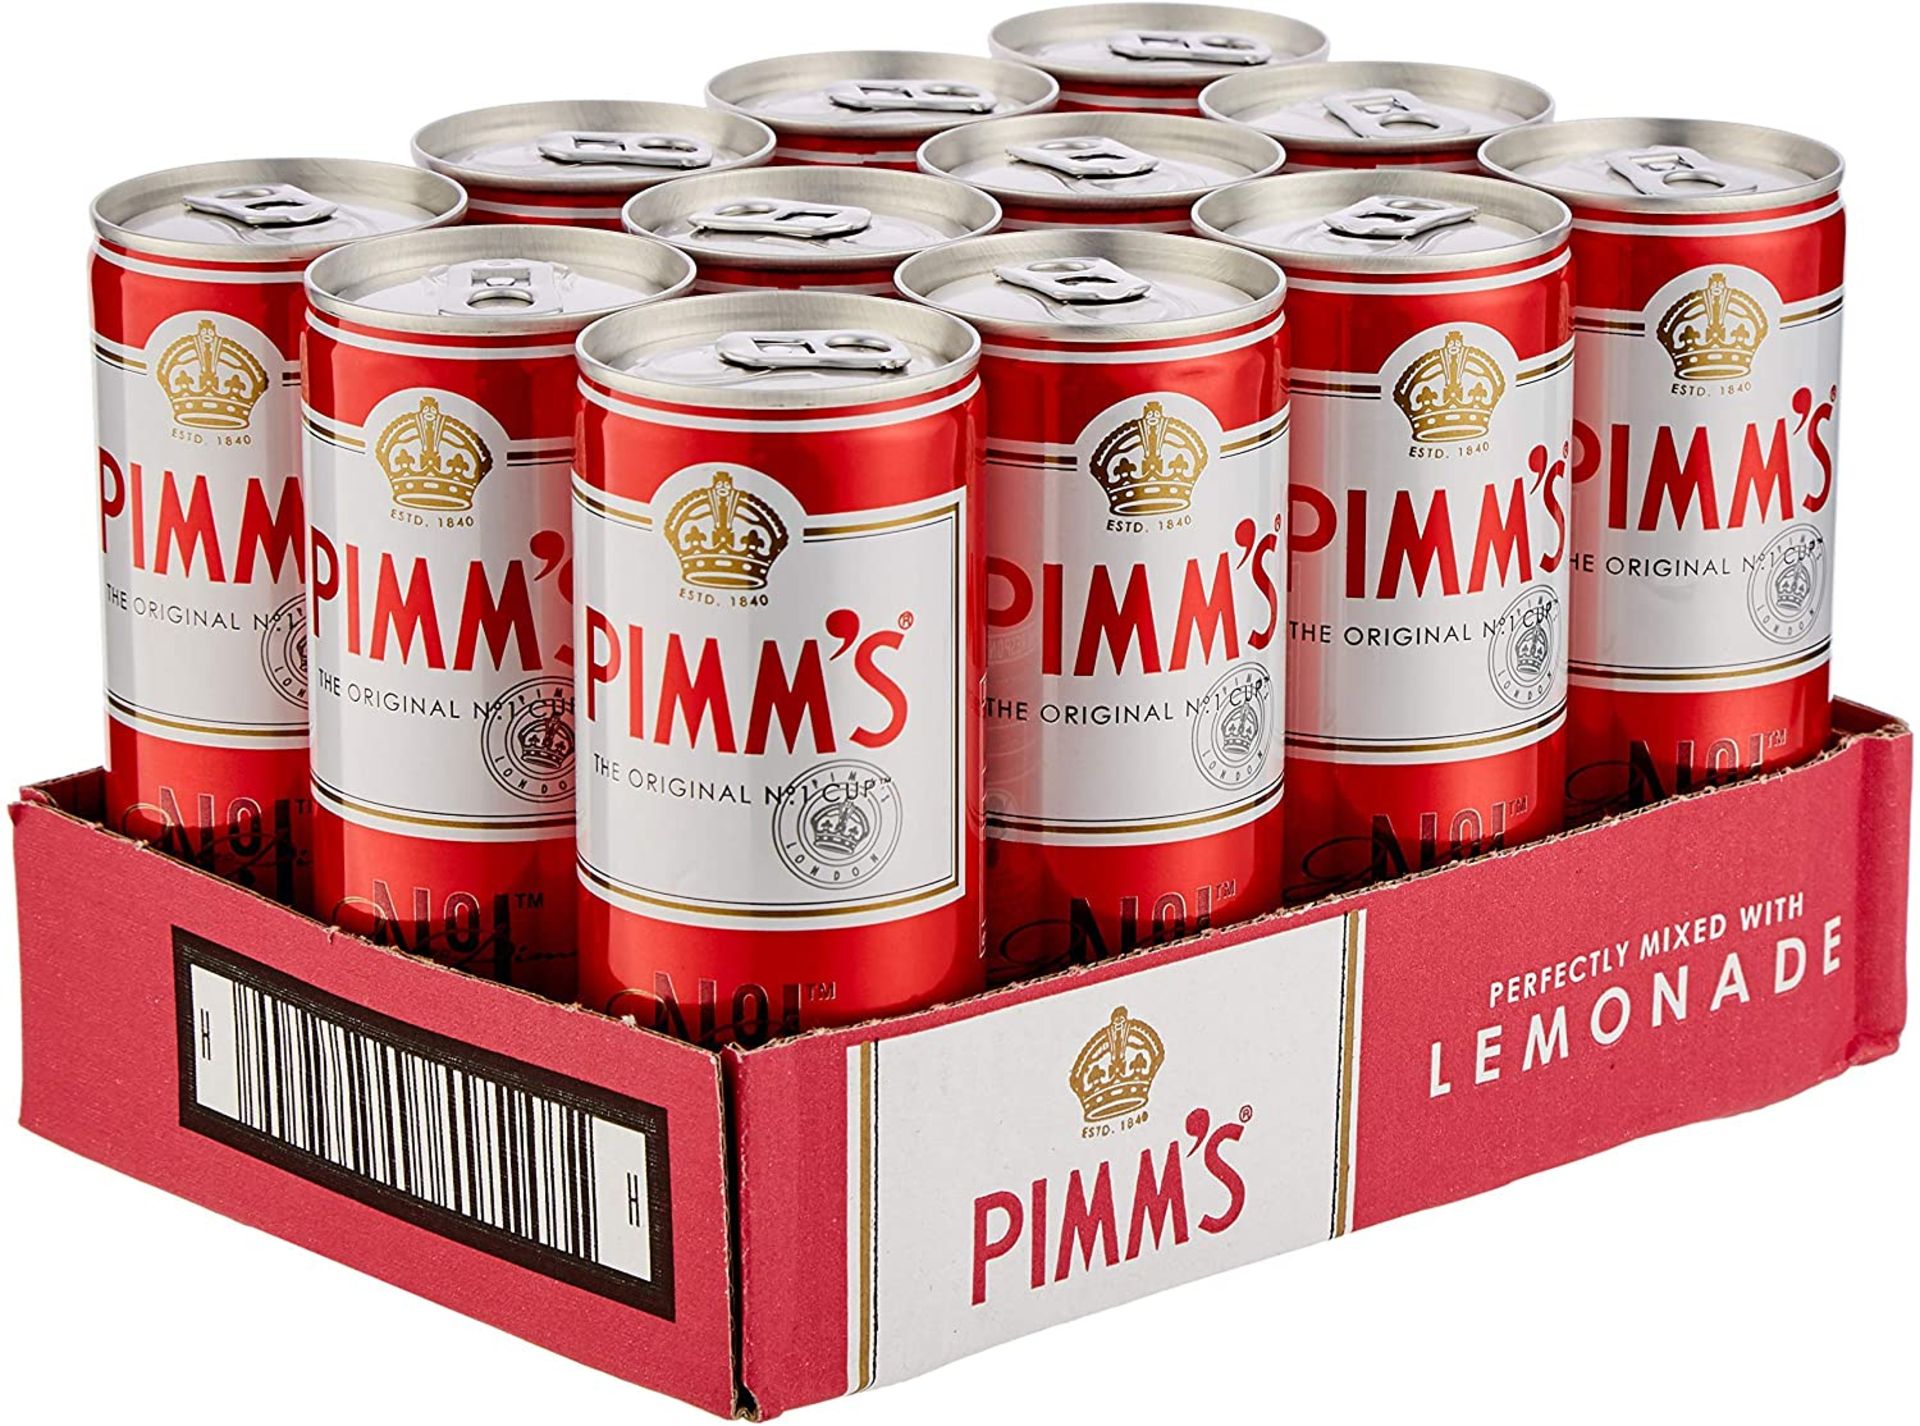 Pimms Lemonade Cocktail Can England ( Bid Is For 1x Case Of 12 Option To Purchase More) - Image 2 of 2